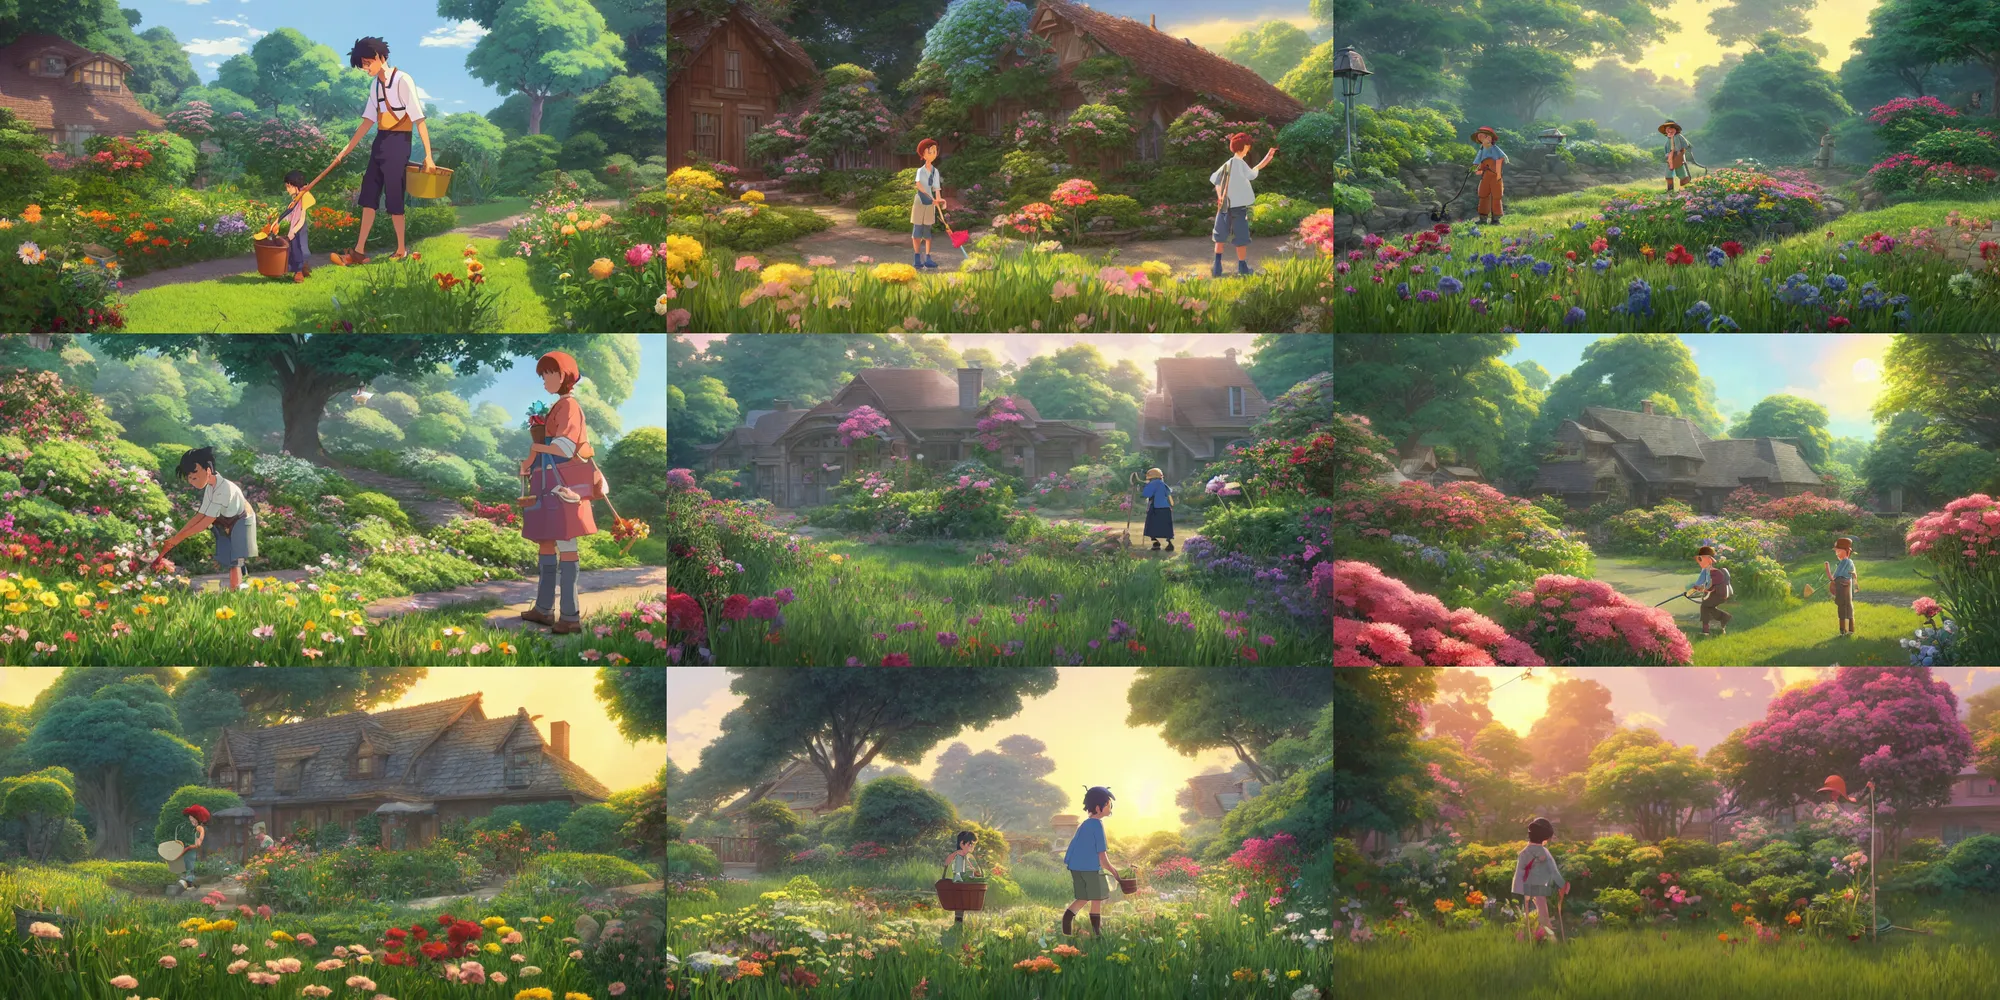 I finished an anime that gave me huge cottagecore feelings: Hakumei to  Mikochi. It's really cute and really simple. It follows two 